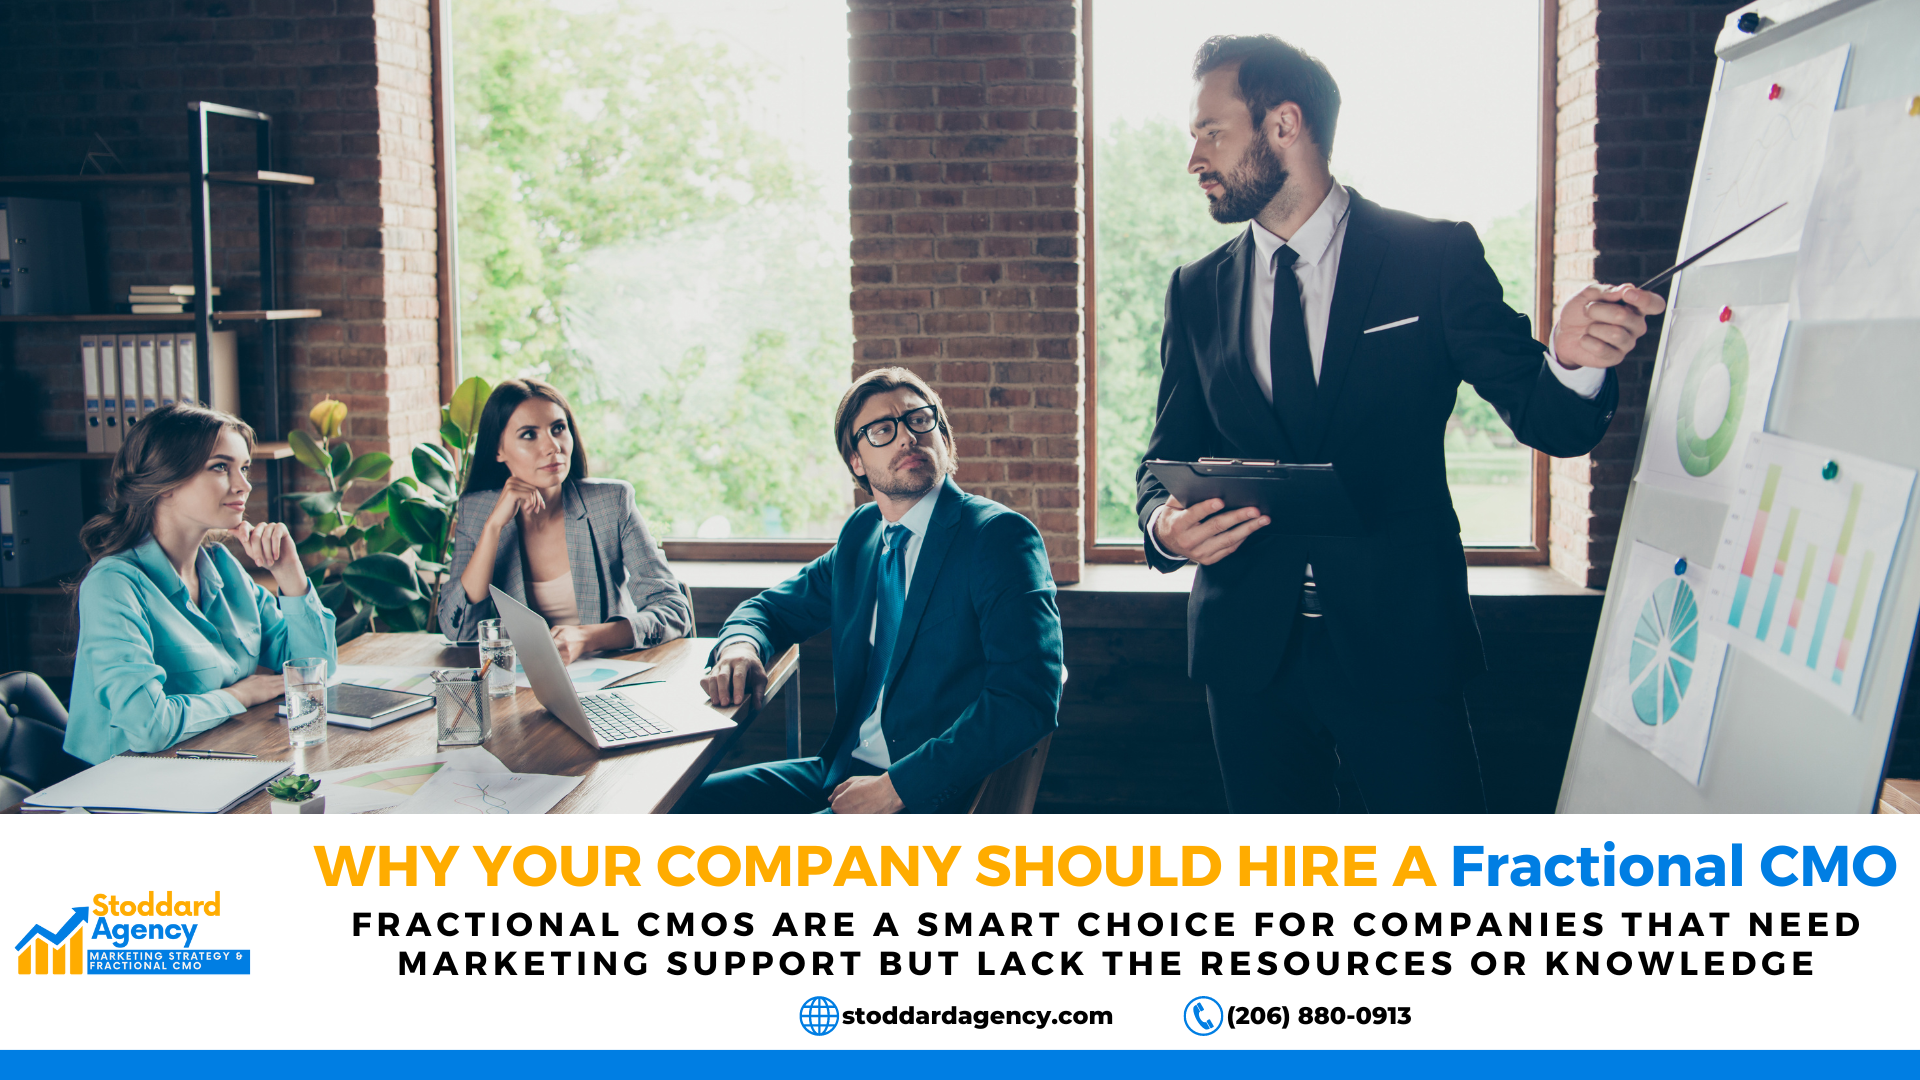 Why Your Company Should Hire a Fractional CMO